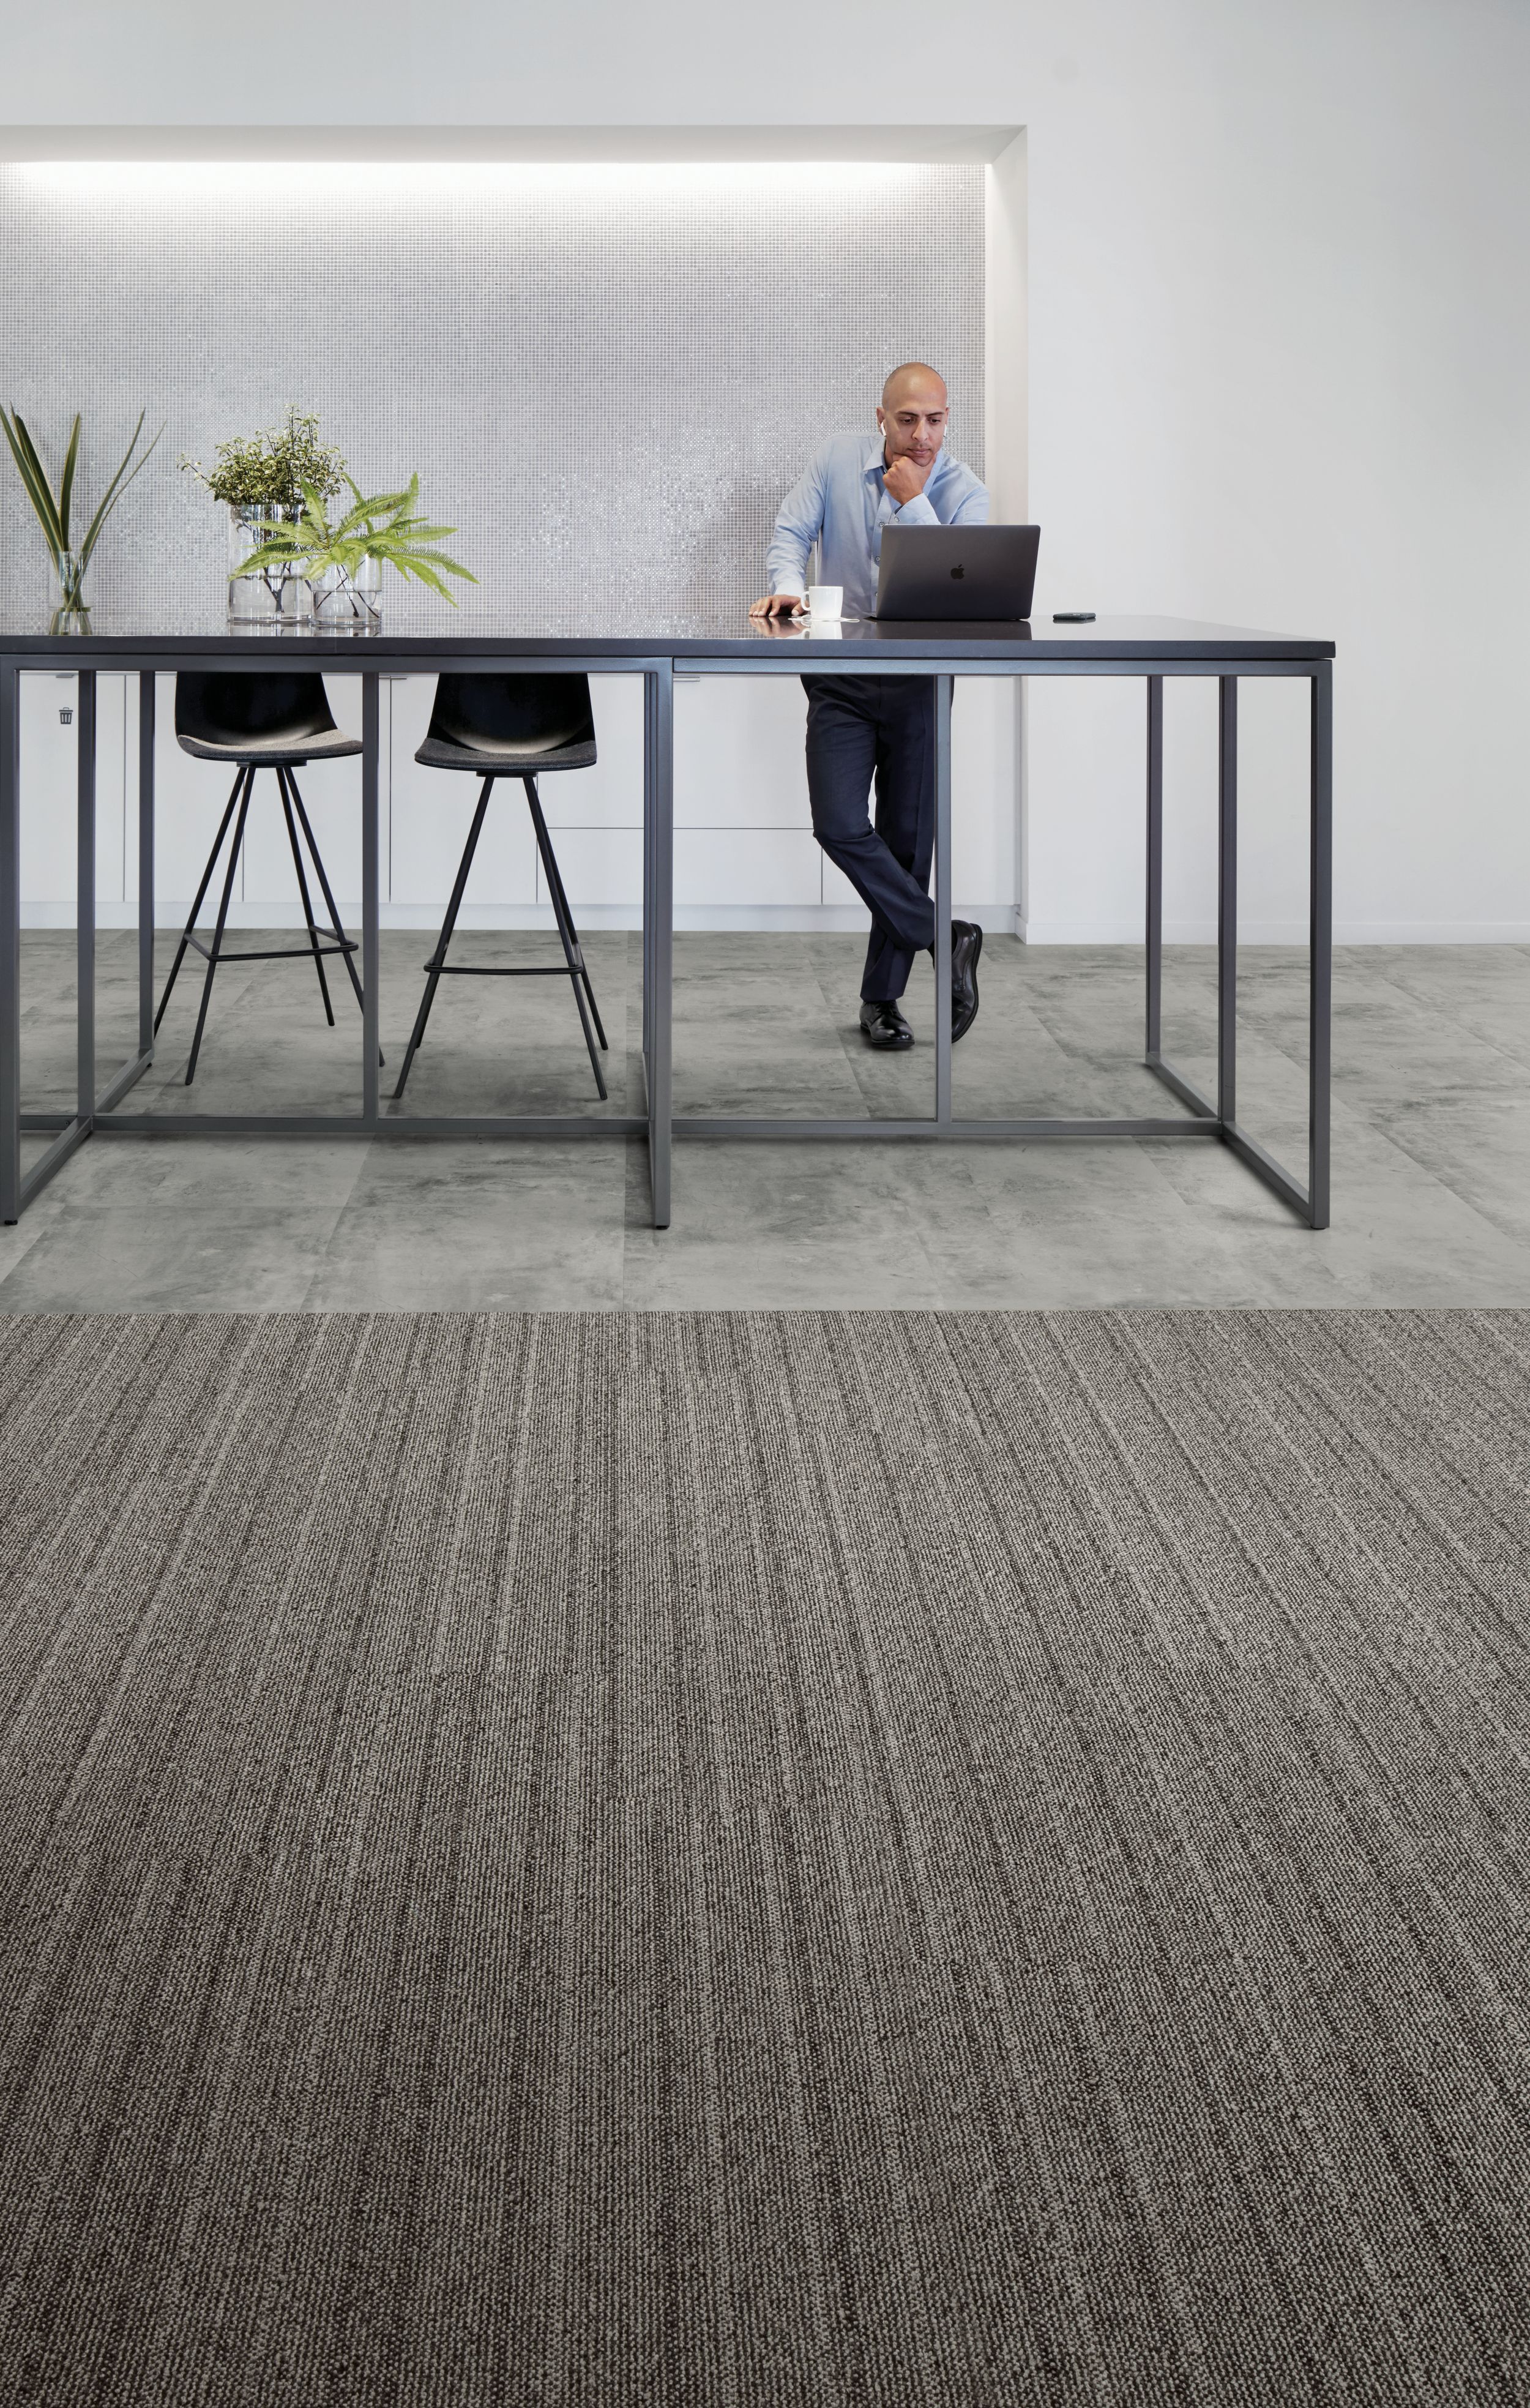 Interface WW860 plank carpet tile with Textured Stones LVT in office work space afbeeldingnummer 3